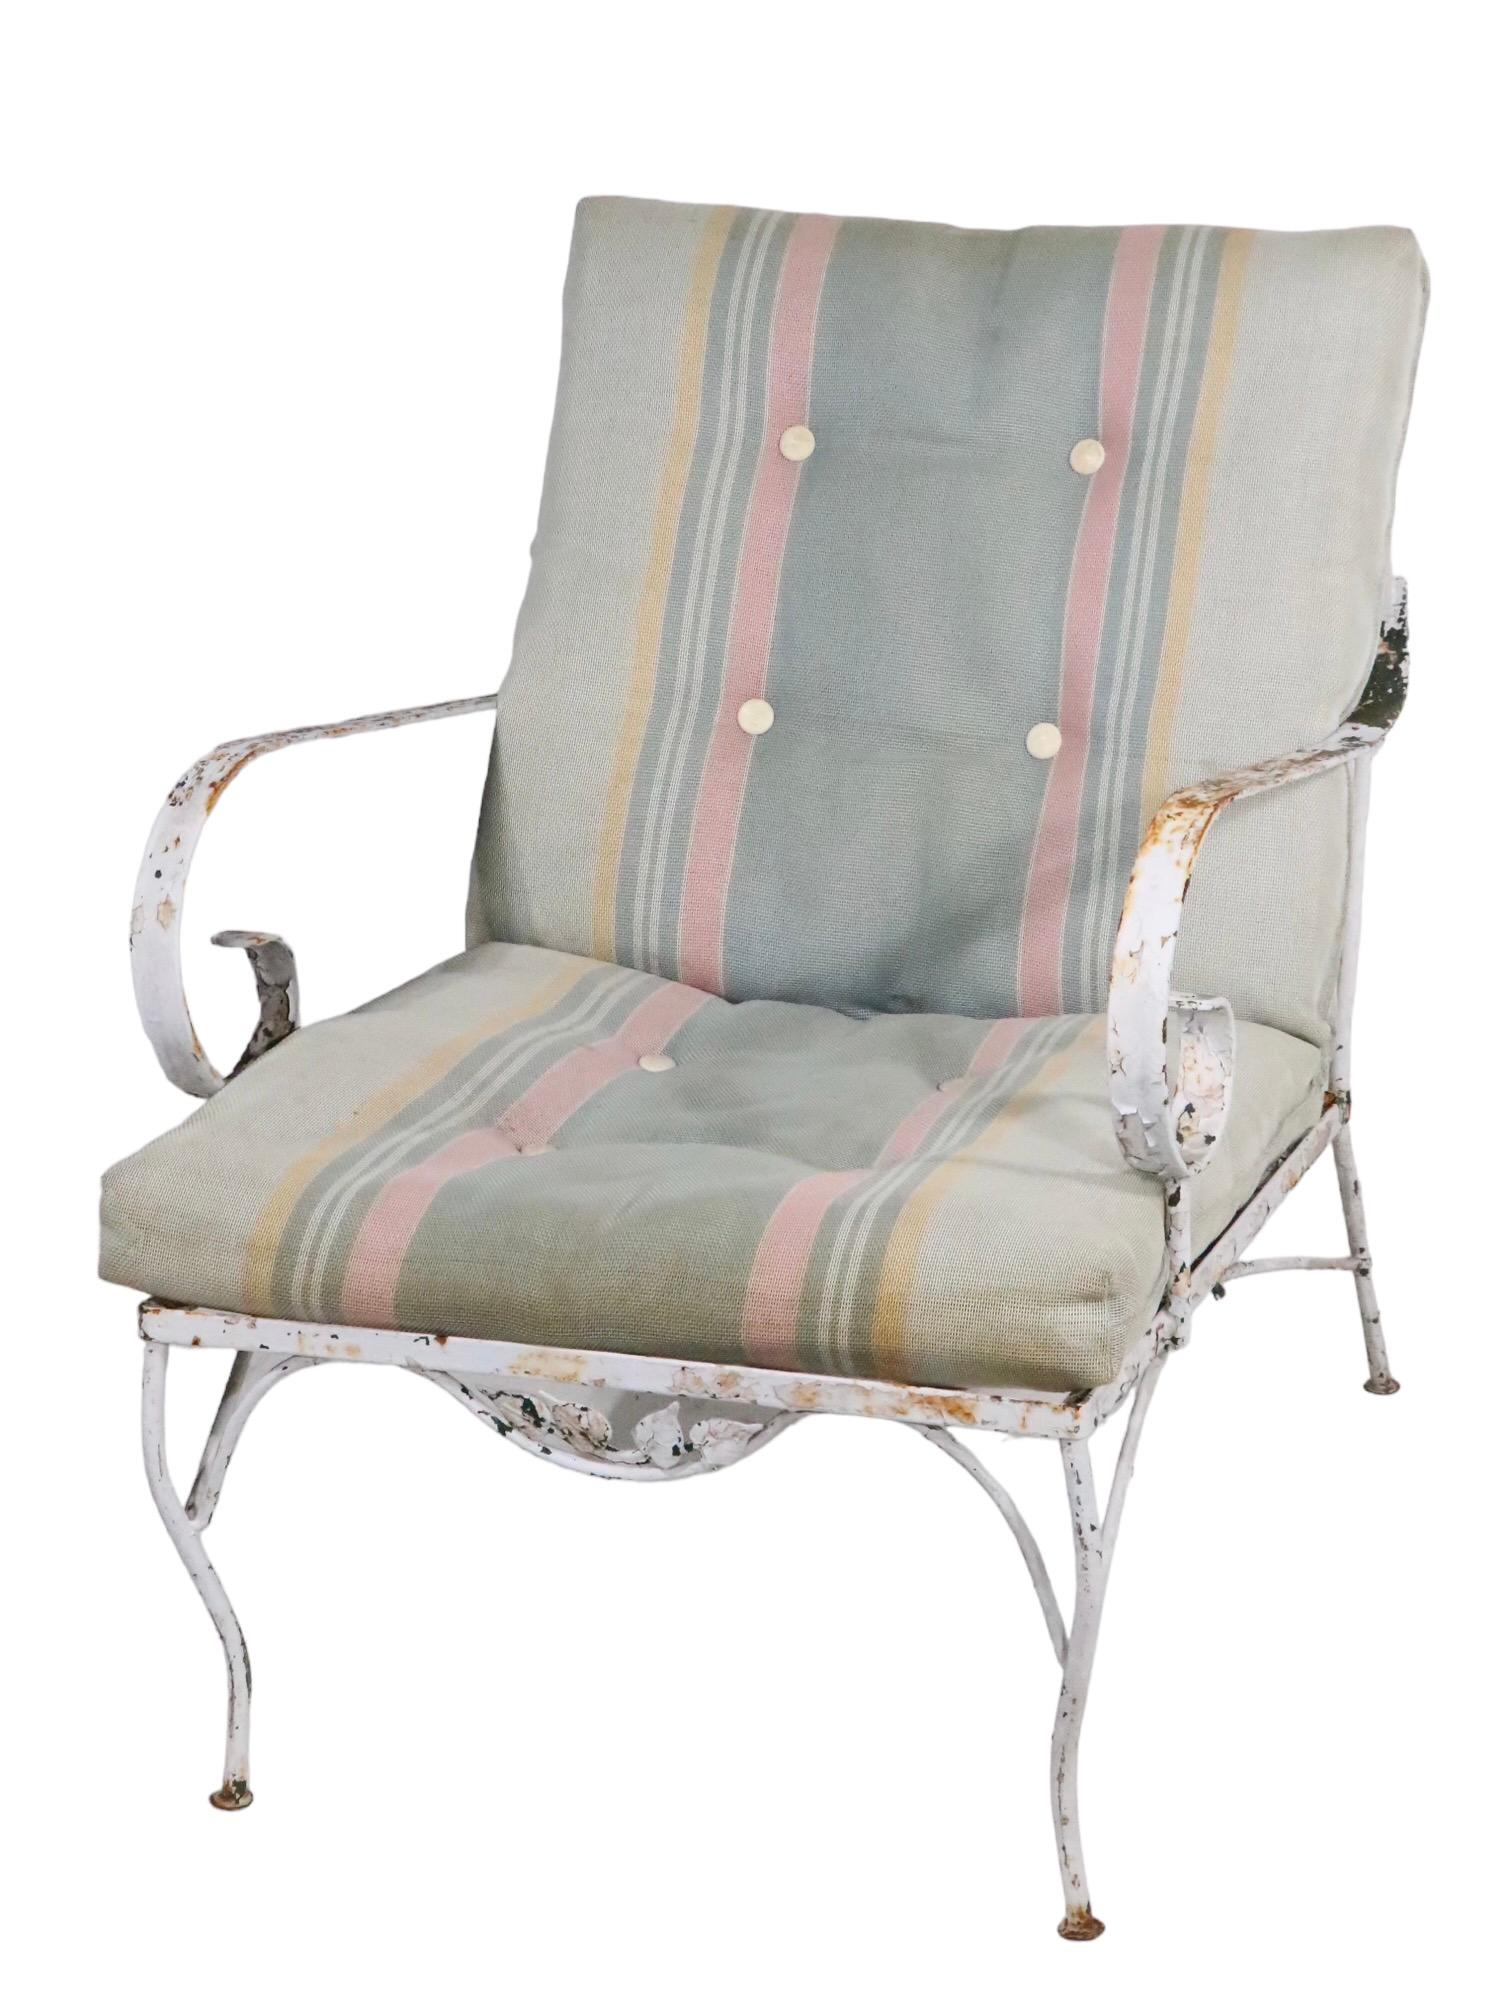 Chic wrought iron lounge chair, having a dramatic exaggerated scrolled arm rest and decorative metal foliate trim. The chair is structurally sound and sturdy, the paint finish shows considerable wear, please see images. Usable as is or we also offer